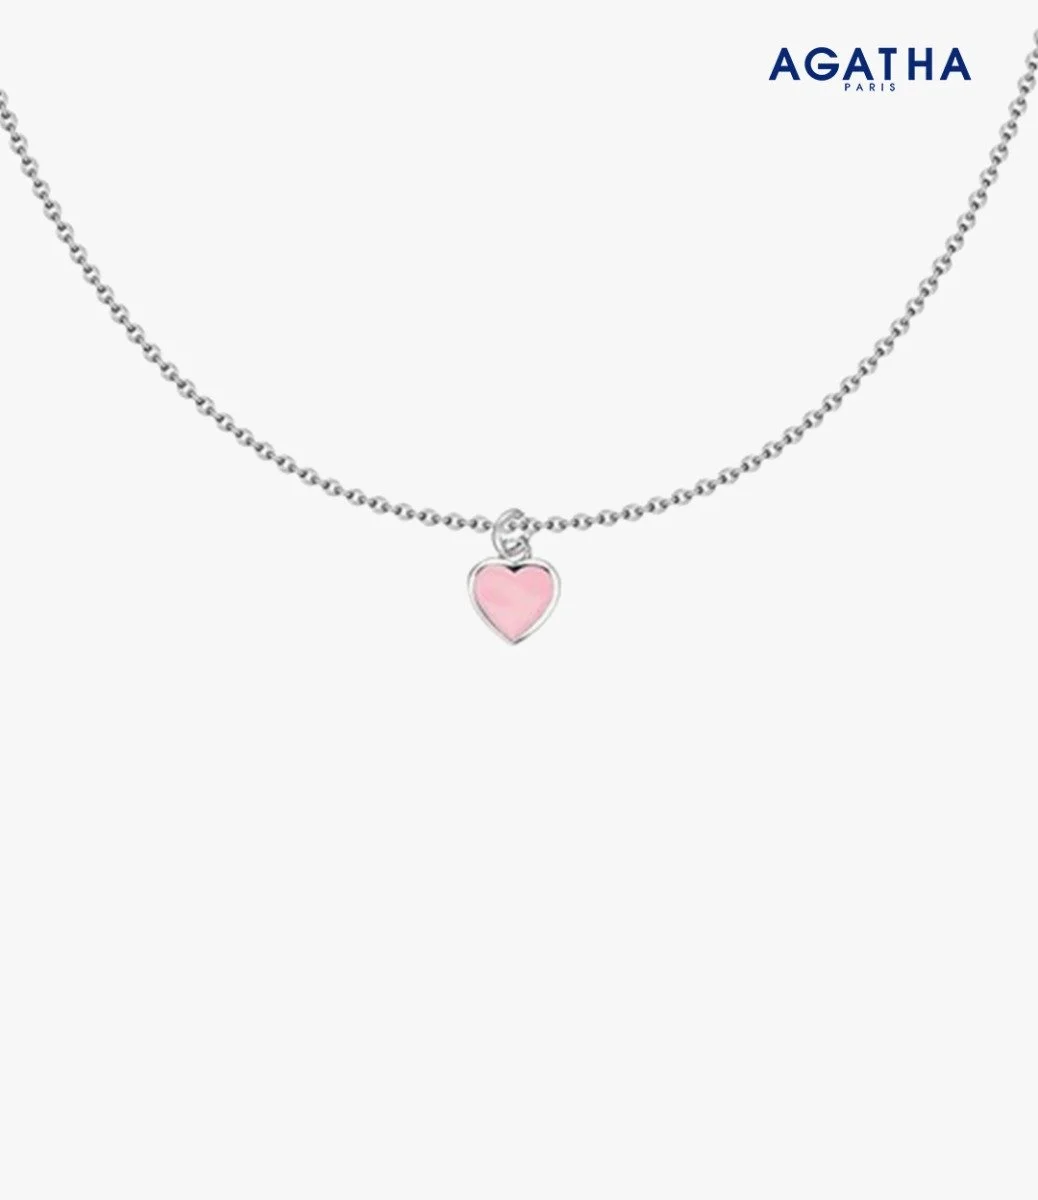 Children Necklace with Enamel Heart on Silver Chain by Agatha Paris